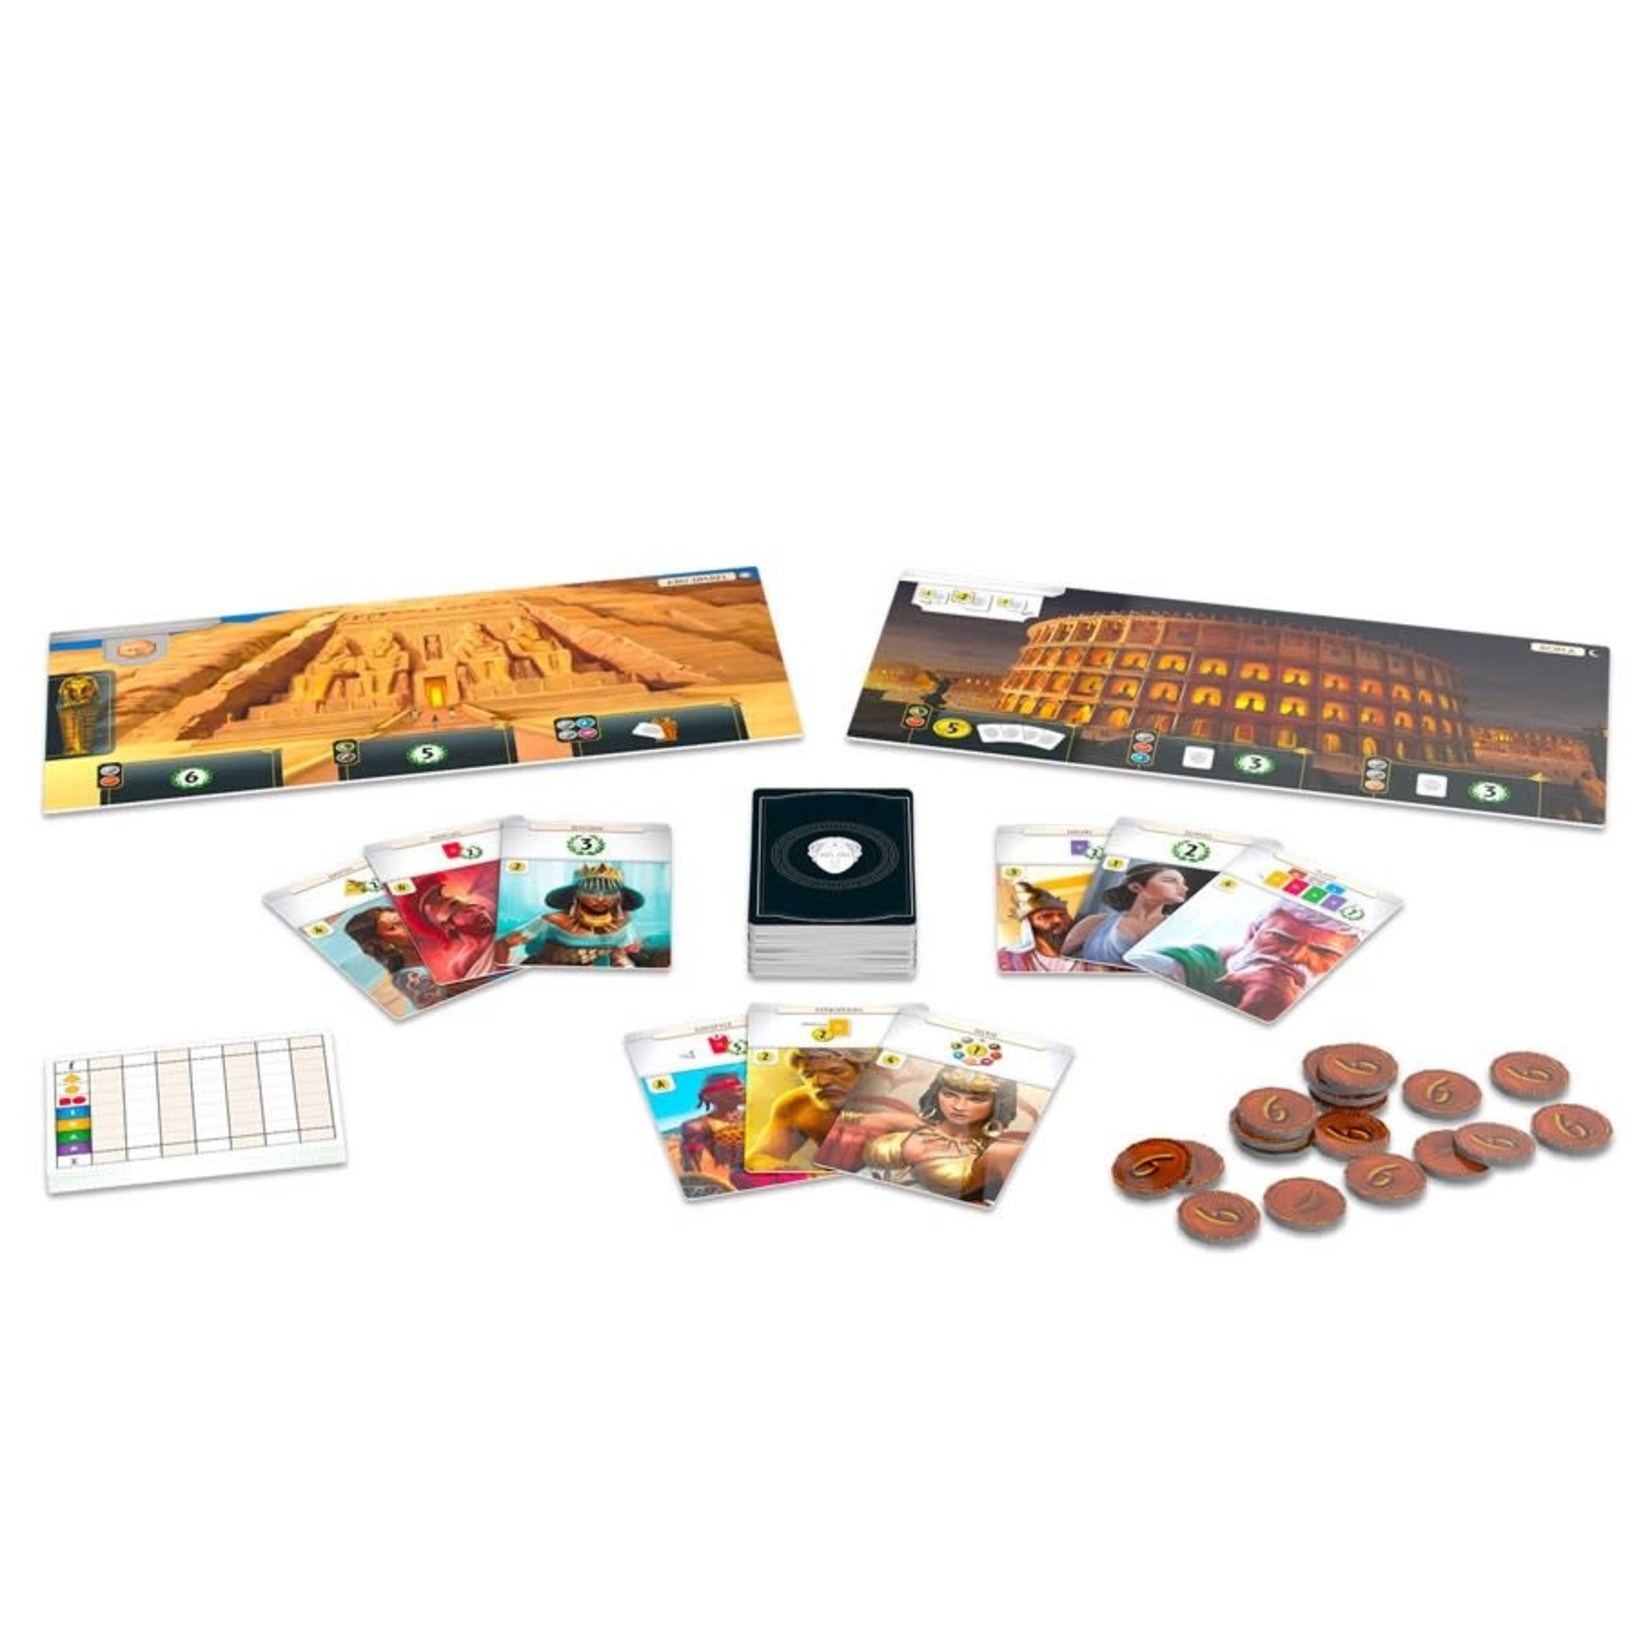 Asmodee Editions 7 Wonders: Leaders Expansion (New Edition)